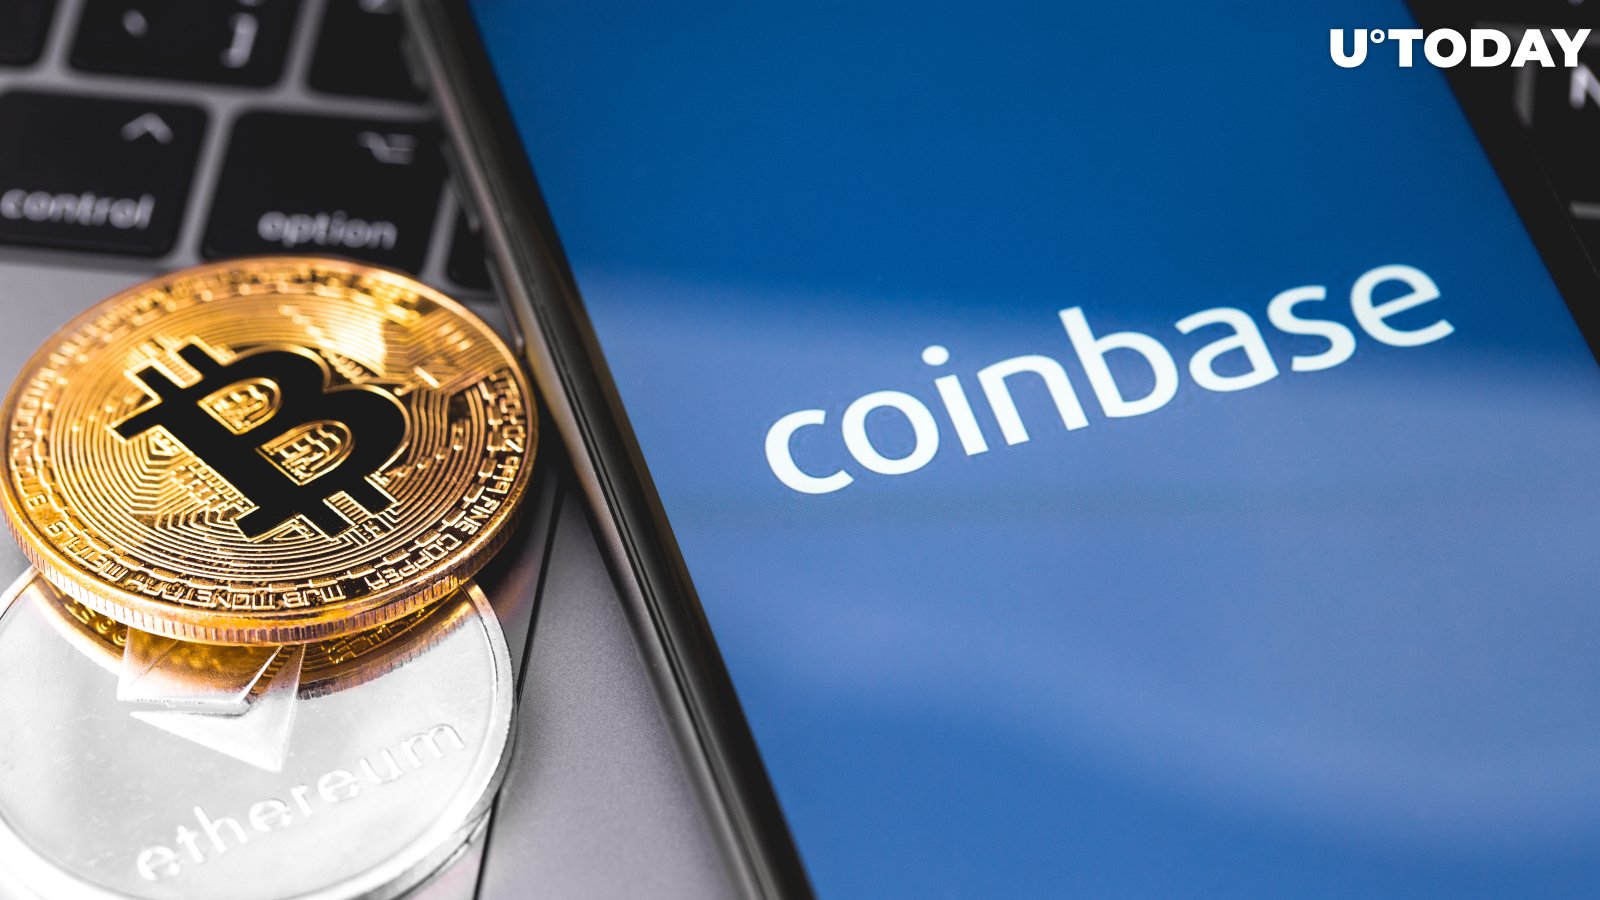 Breaking: Crypto Exchange Coinbase Expected to Debut on U.S. Stock Market This Year 